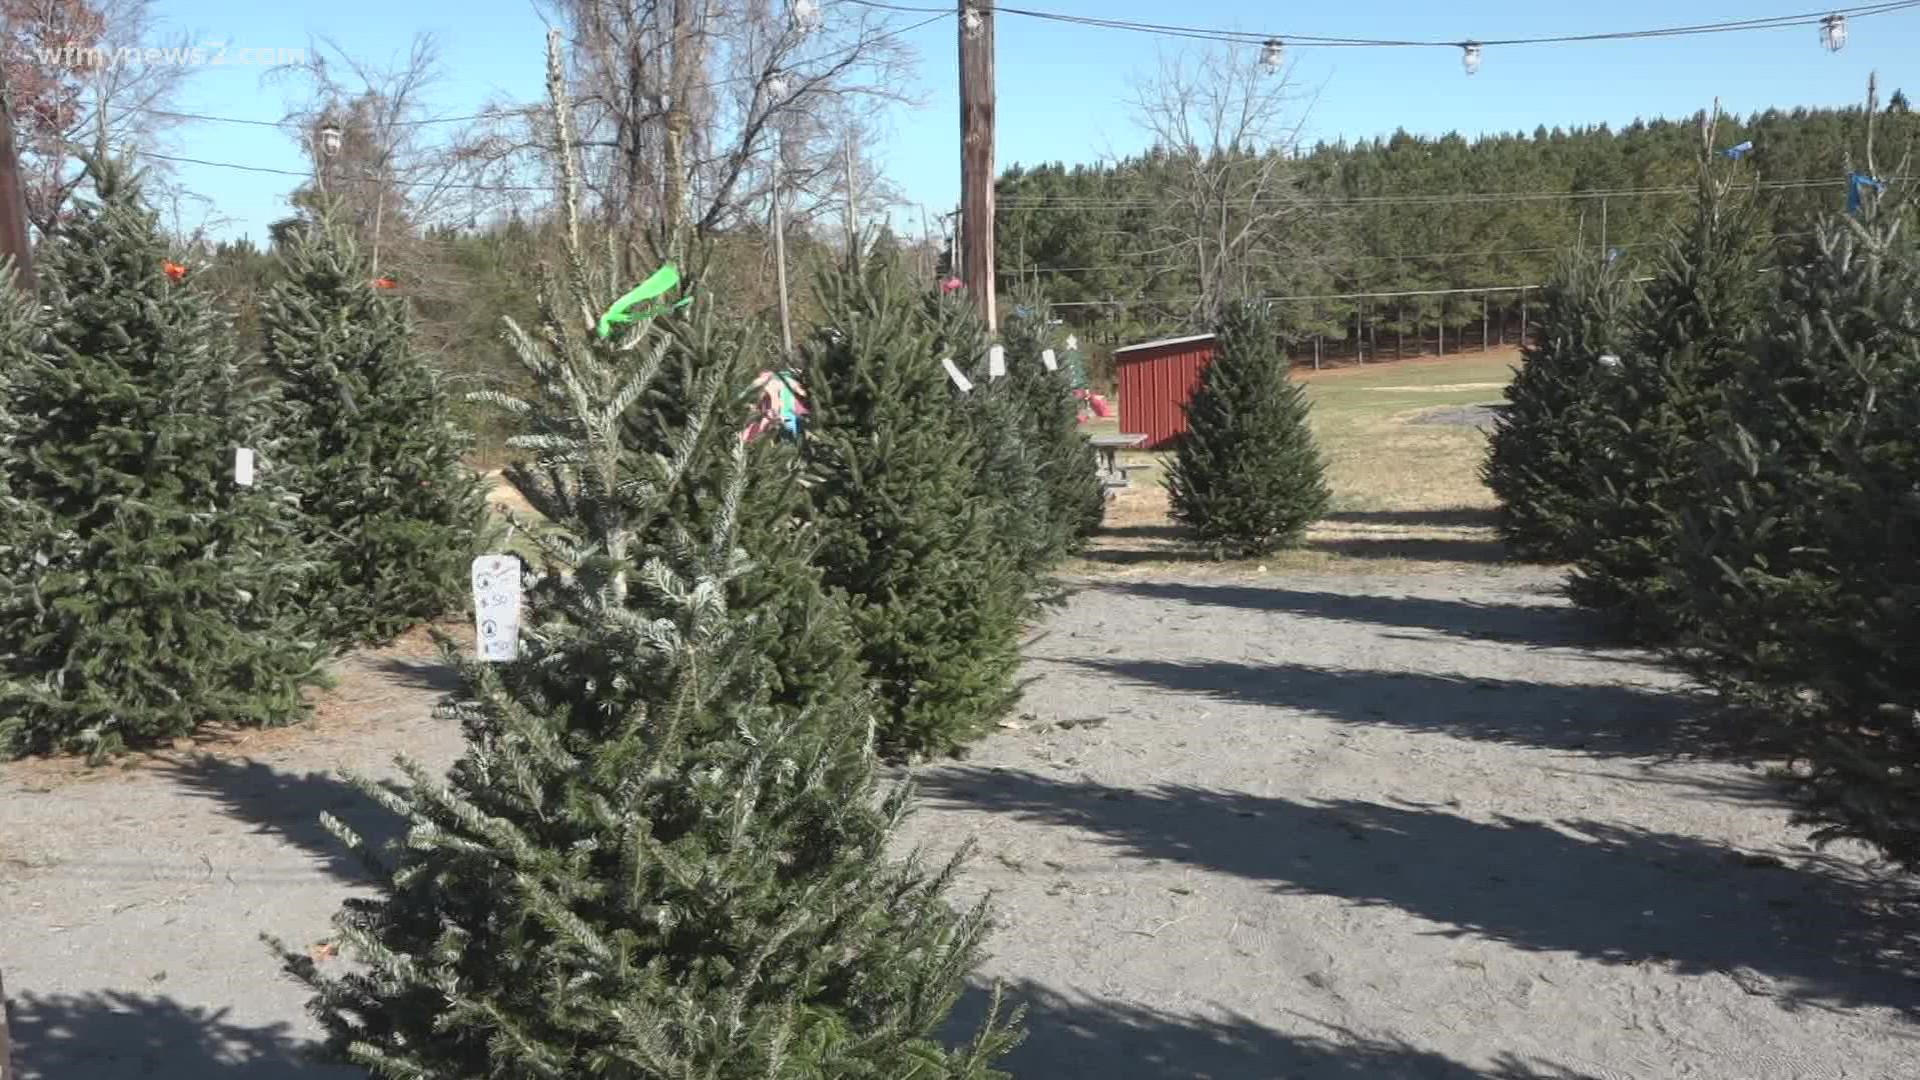 If you want a specific Christmas tree, farmers and sellers say don't wait until the last minute.